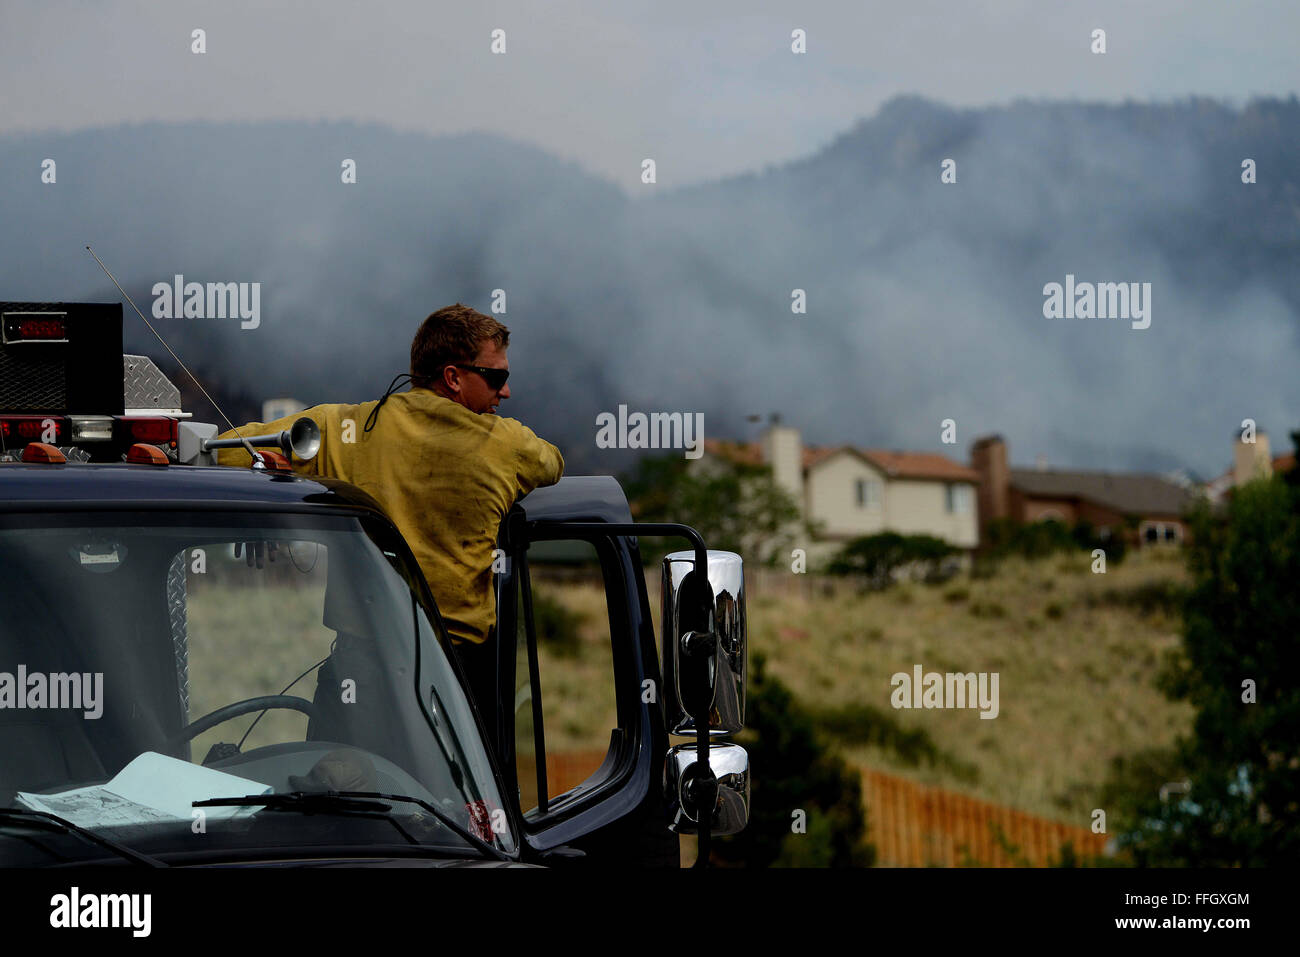 Vandenberg Air Force Base Hot Shot fire fighter Richard Strange looks out at his worksite for the day on June 28, 2012 in the Mount Saint Francois area of Colorado Springs, Co. His team will be cutting a fire line while helping to battle several fires in Waldo Canyon.  The Waldo Canyon fire has grown to 18,500 acres and burned over 300 homes. Currently, more than 90 firefighters from the Academy, along with assets from Air Force Space Command; F.E. Warren Air Force Base, Wyo.; Fort Carson, Colo.; and the local community continue to fight the Waldo Canyon fire. Stock Photo